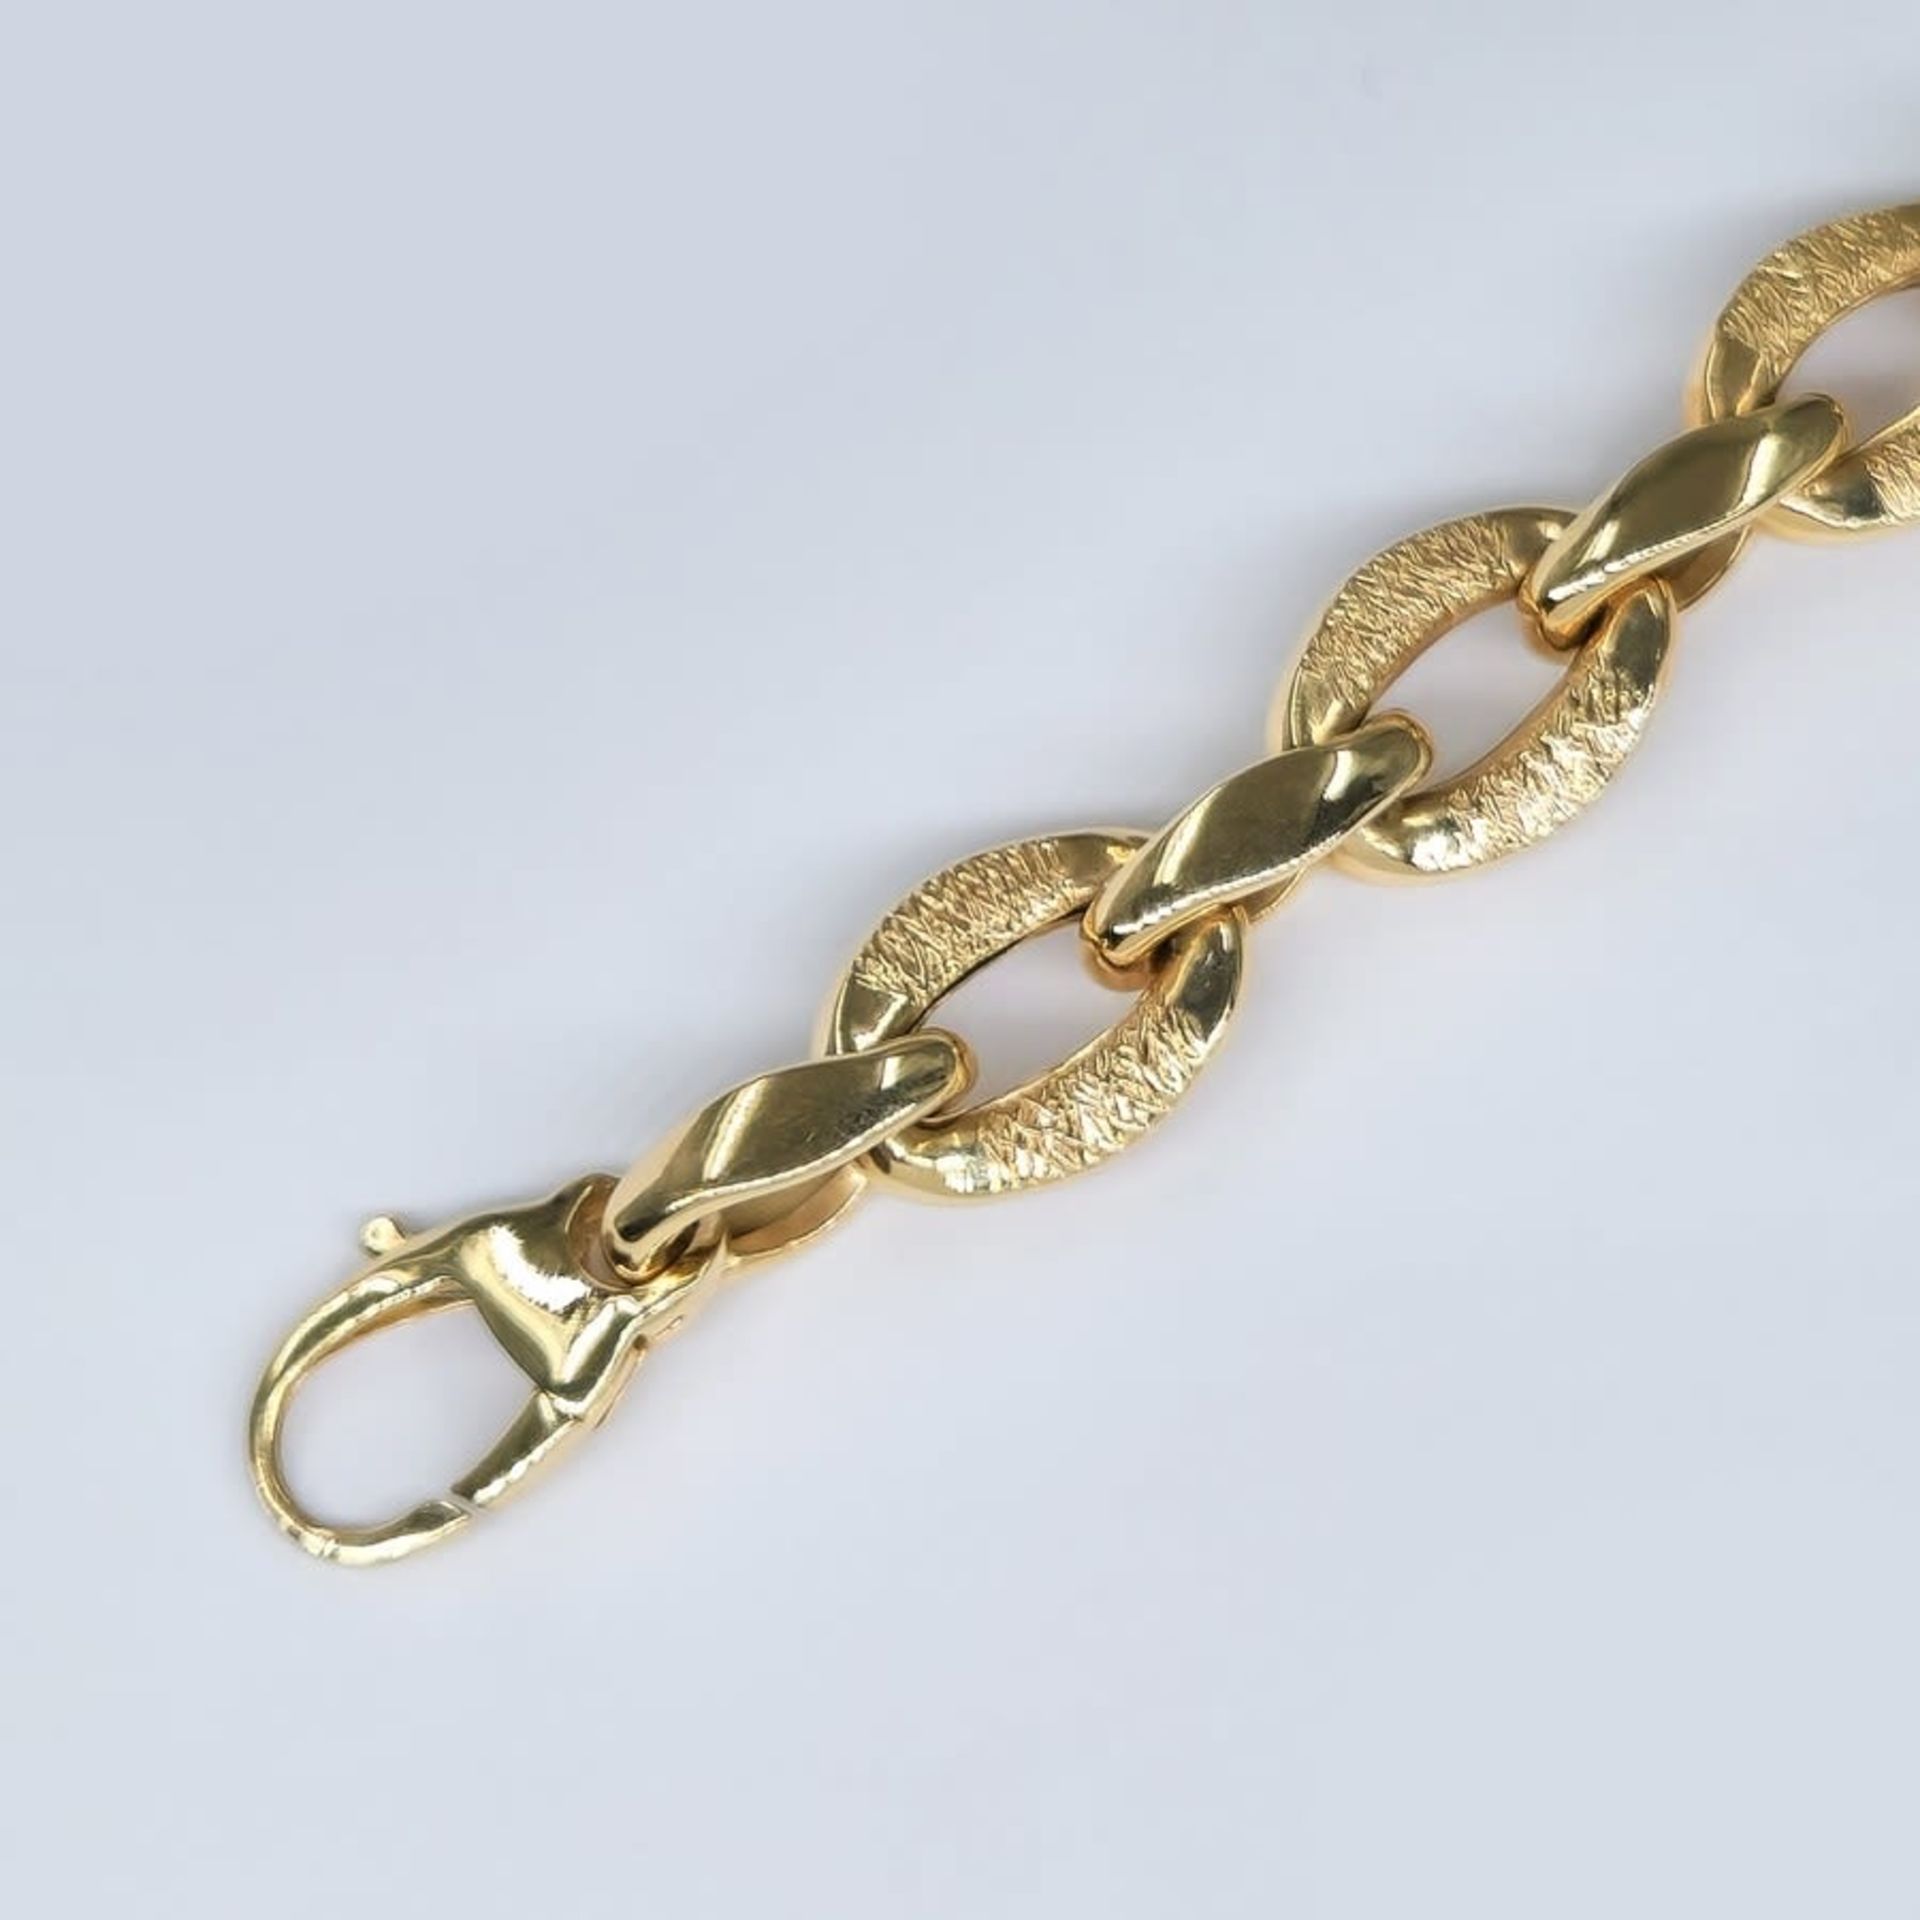 Gold bracelet 14K, signed by the manufacturer and the purity of the gold tested, Weight: 9.66 grams, - Bild 4 aus 4